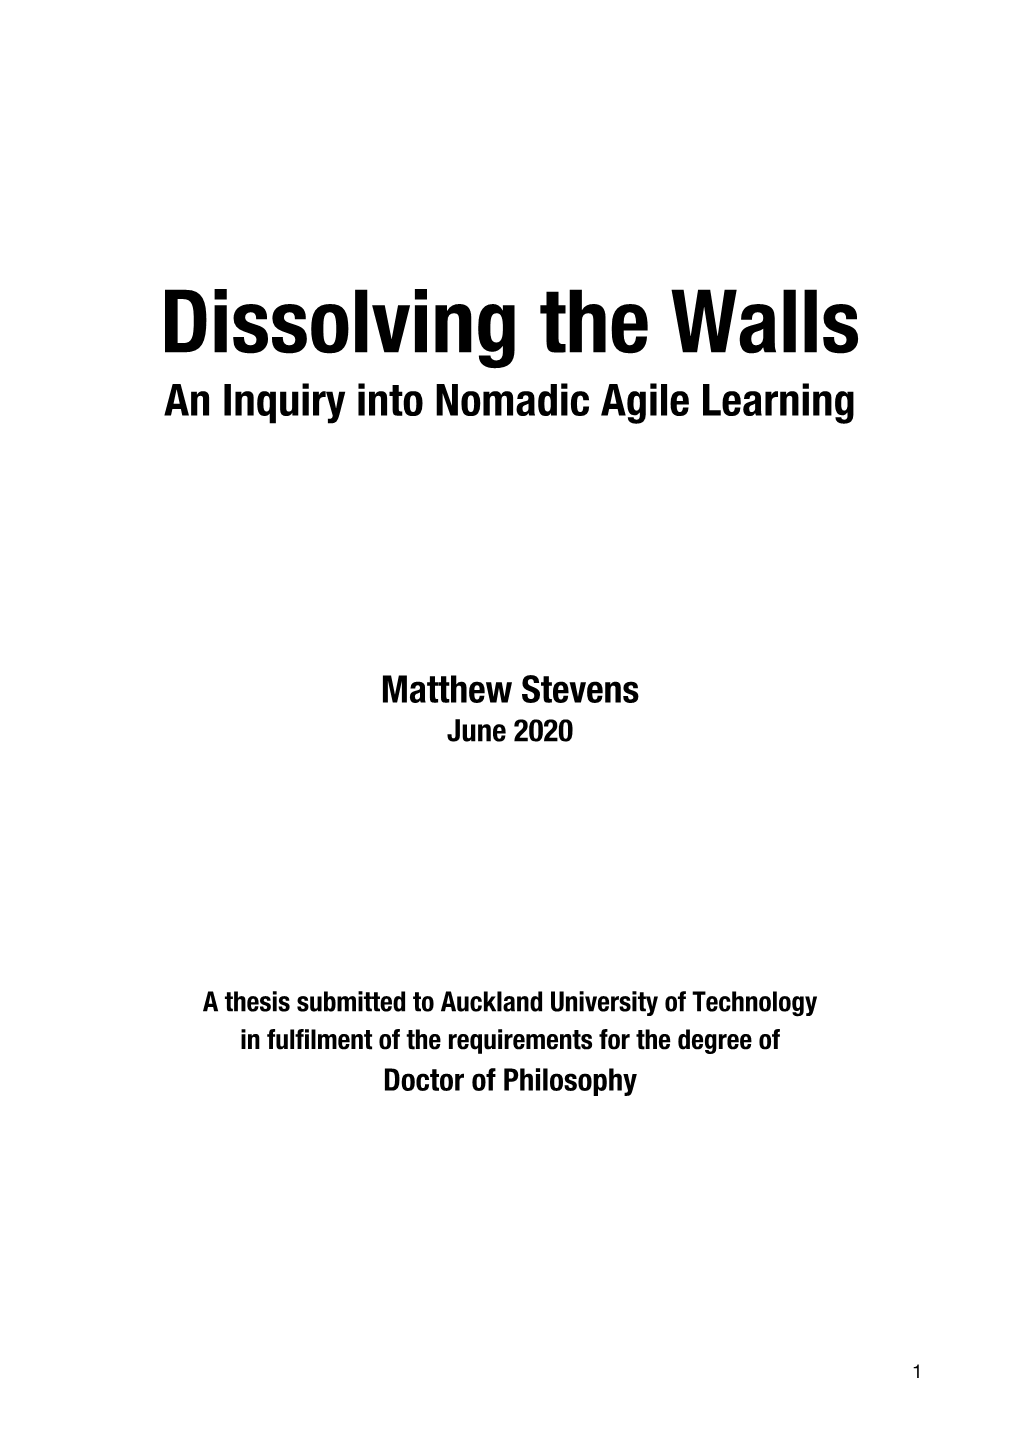 Dissolving the Walls an Inquiry Into Nomadic Agile Learning